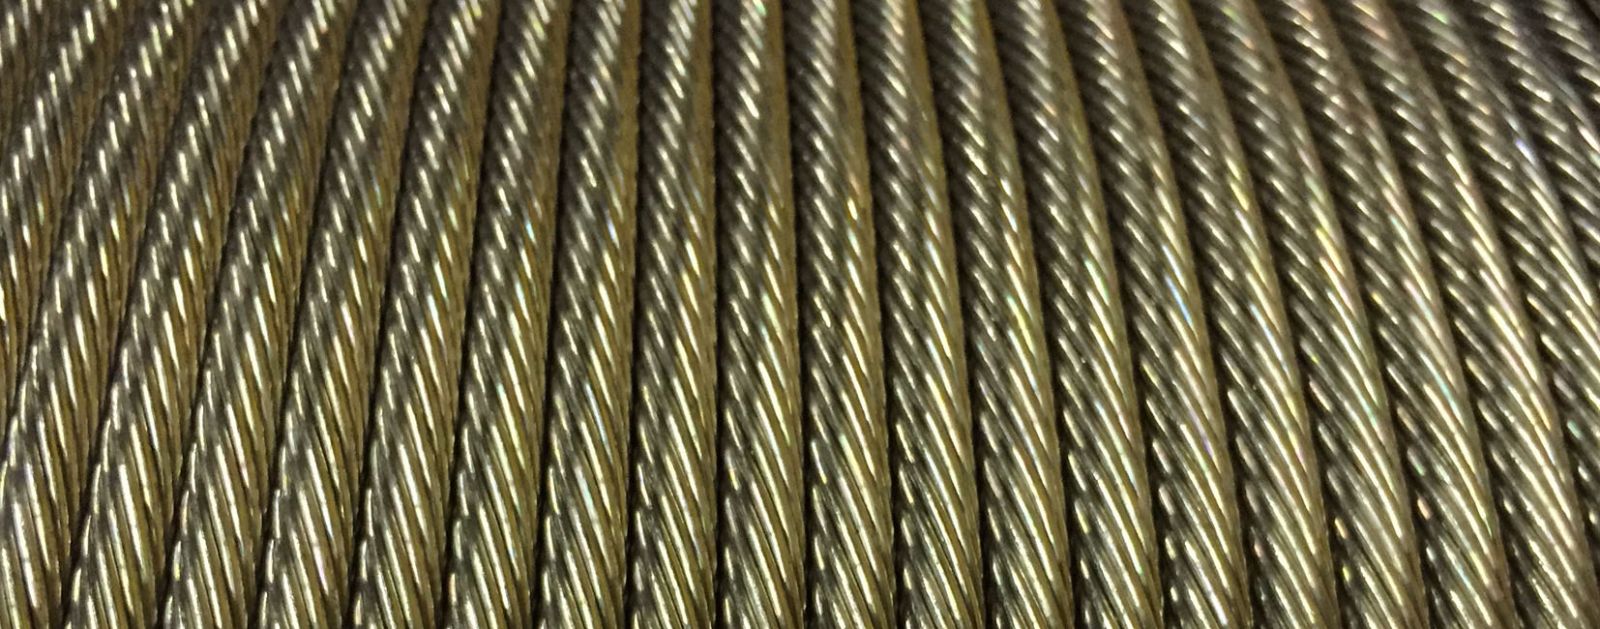 1/4 inch 1x19 Stainless 316 Aircraft Cable | Bluejay Industrial 